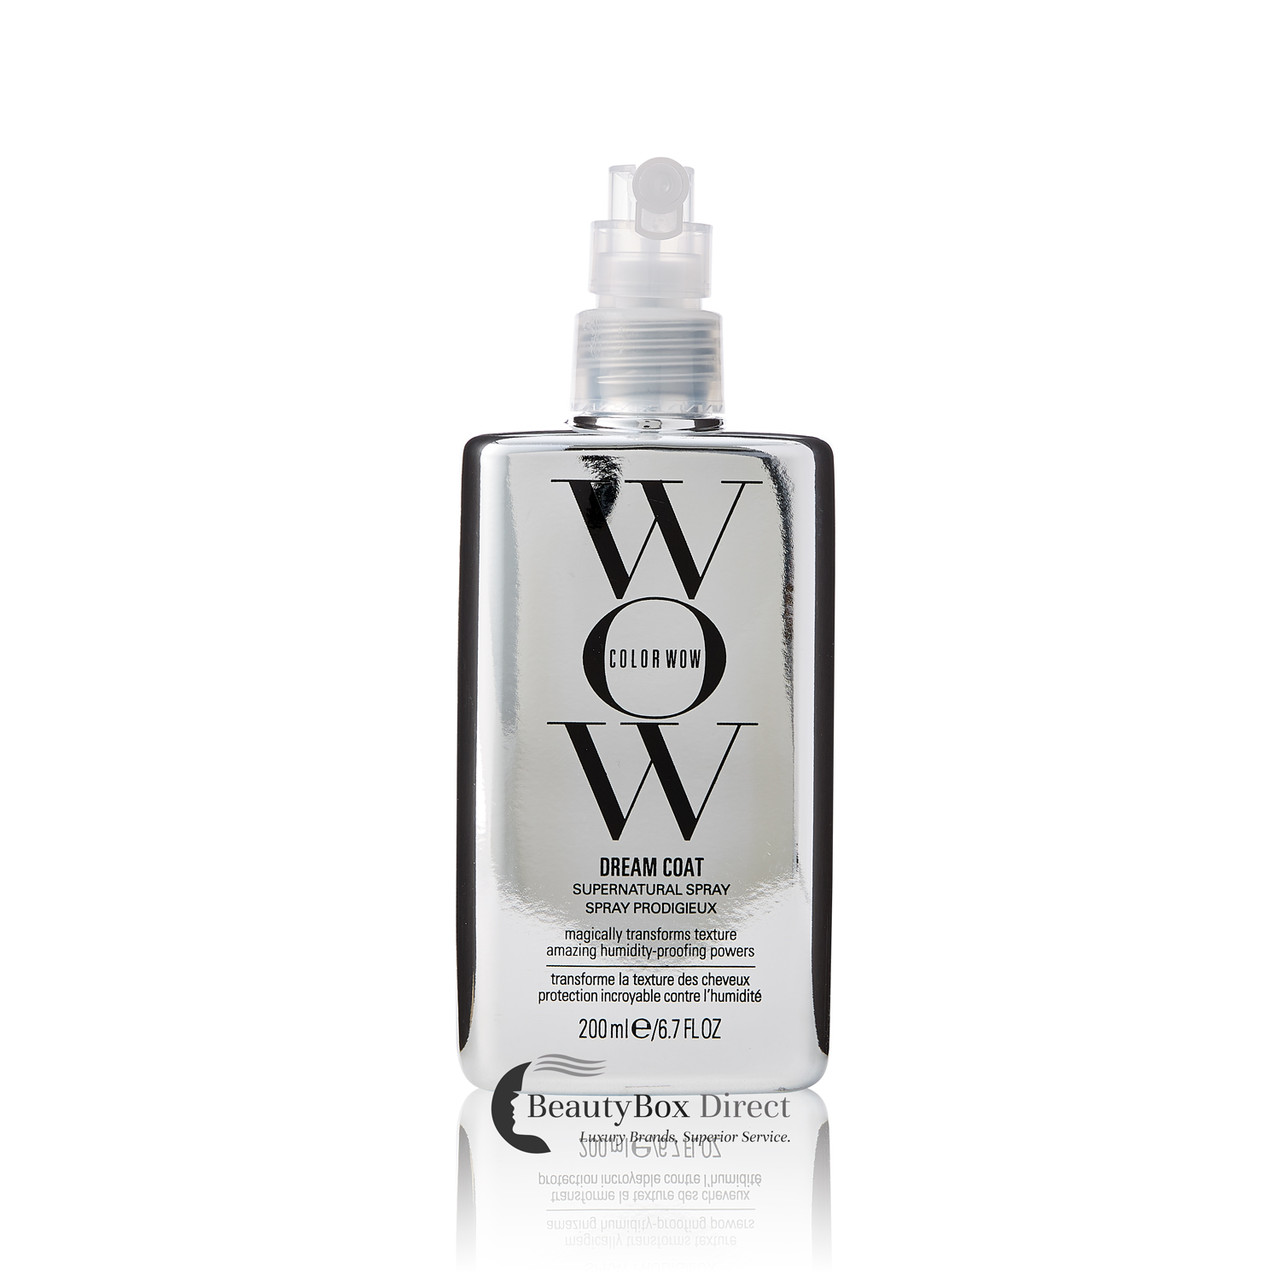 Color Wow Dream Coat Supernatural Spray 6.7 oz - BeautyBox Direct